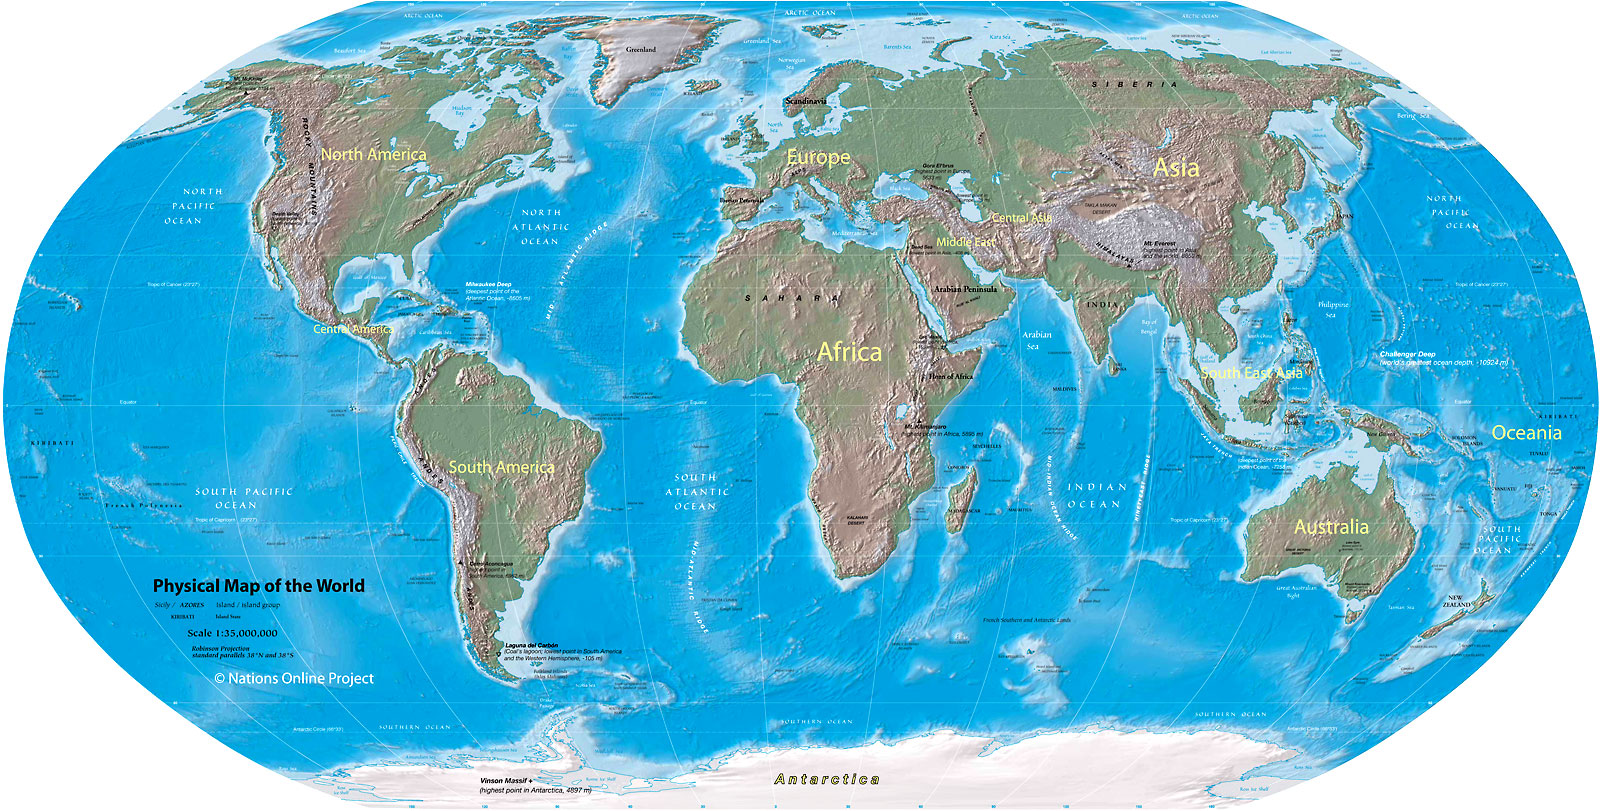 World Map - Physical Map of the World - Nations Online Project